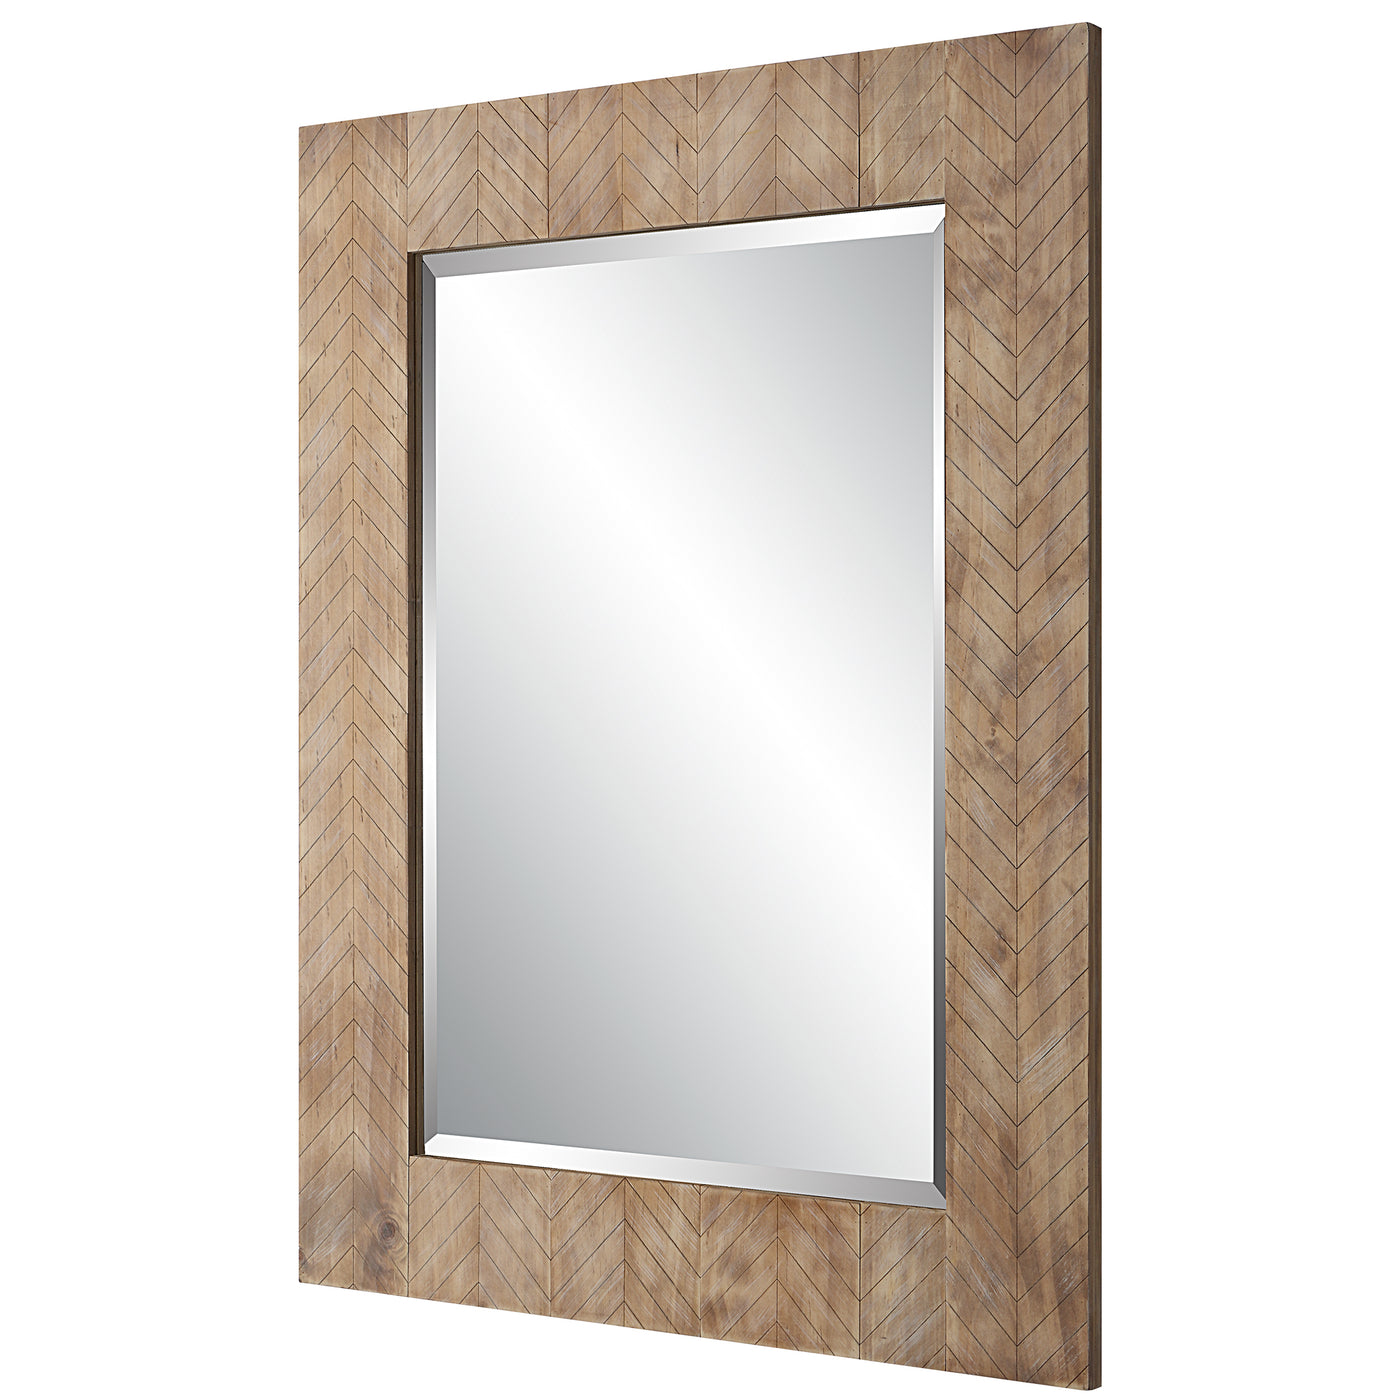 The Telluride - Wooden Chevron Patterned Framed Mirror